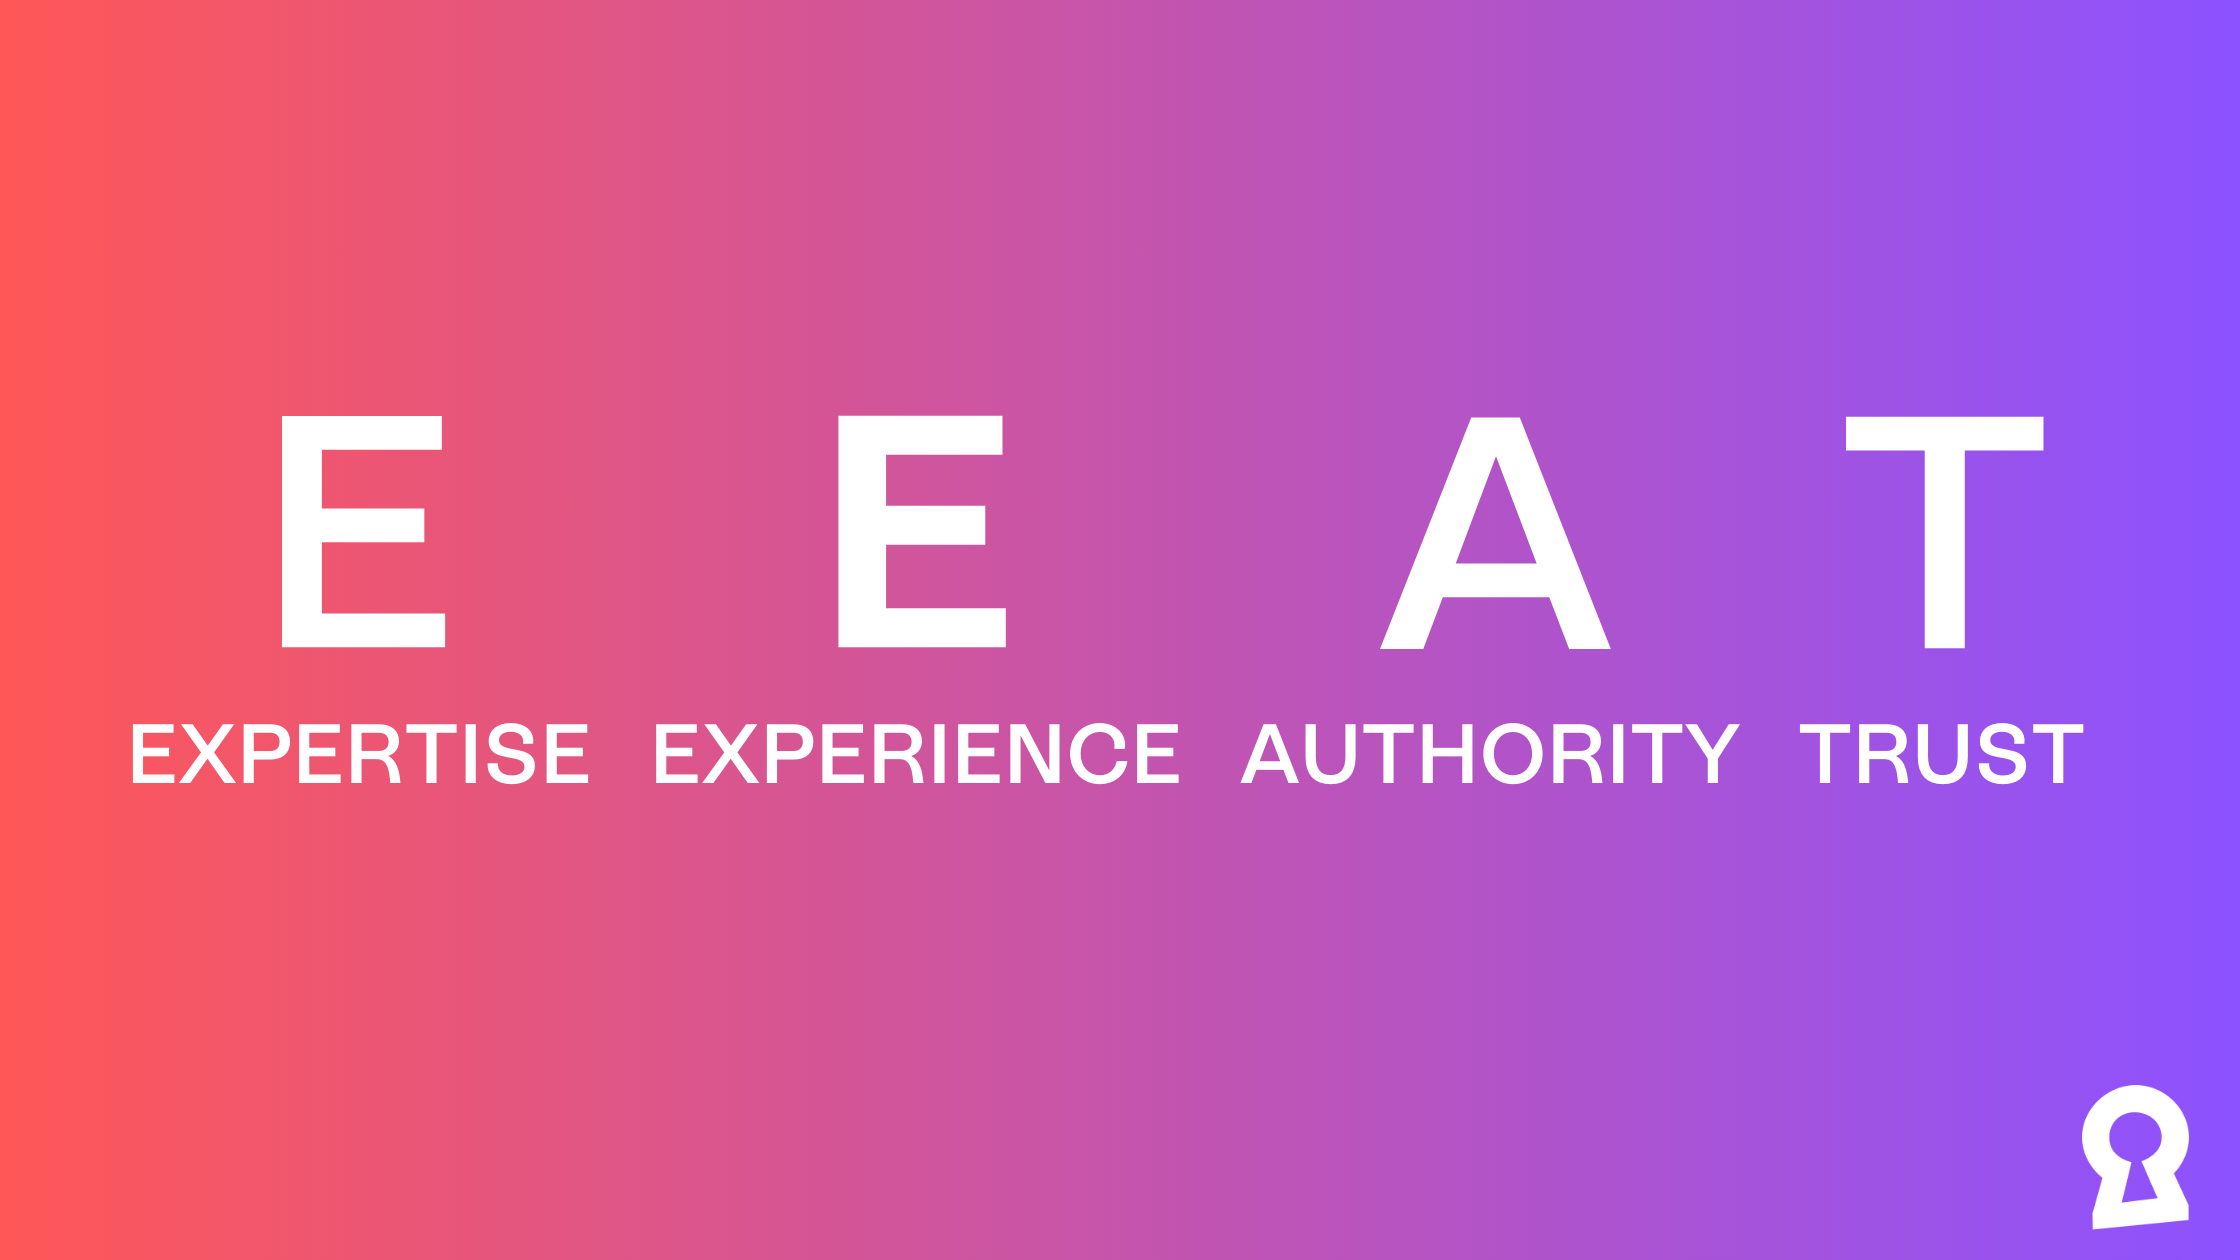 expertise, experience, authority, trust